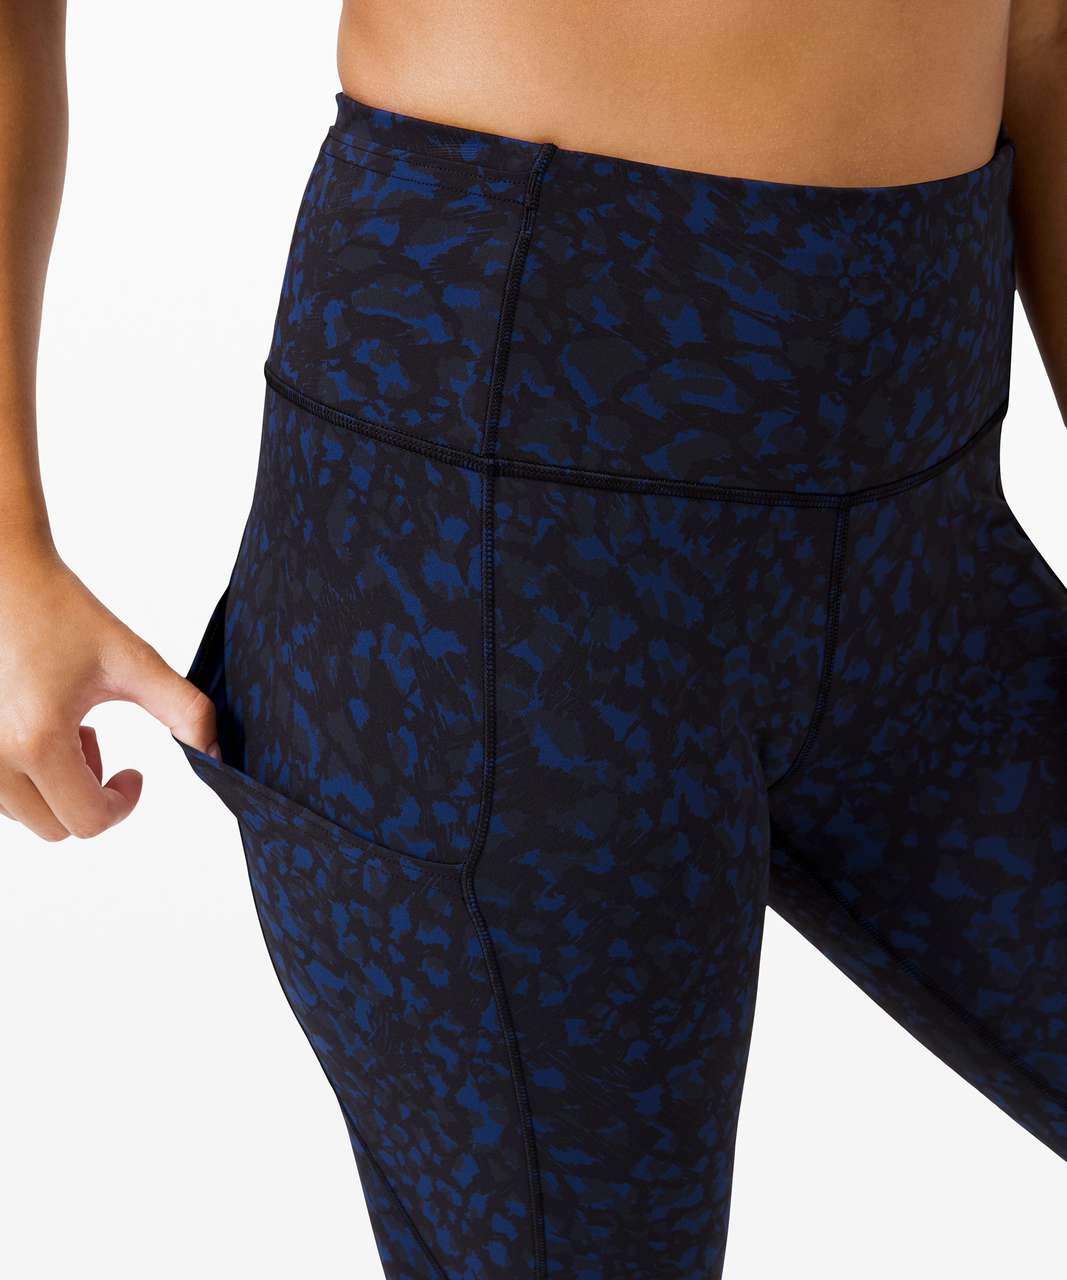 Lululemon Fast and Free High-Rise Crop II 23" *Non-Reflective - Wild Thing Camo Larkspur Multi